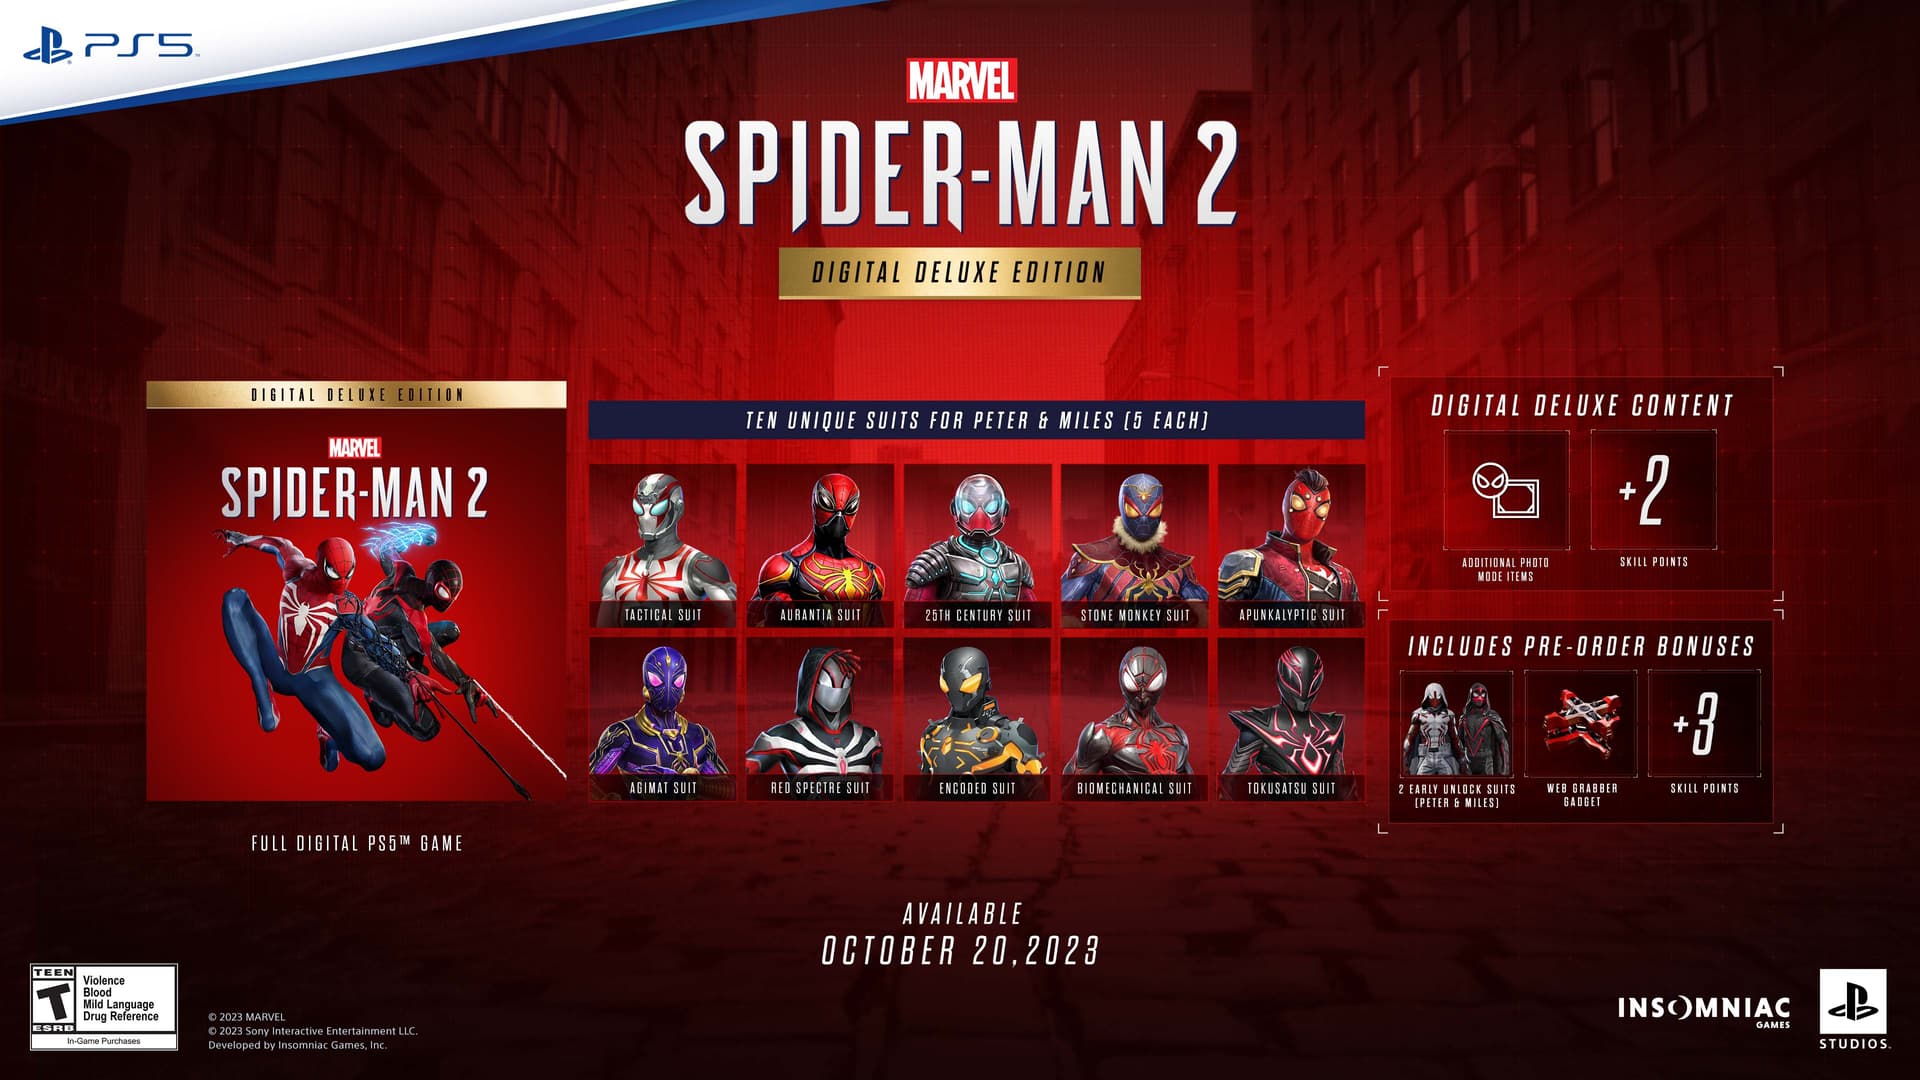 Everything included in the Digital Deluxe Edition of Spider-Man 2